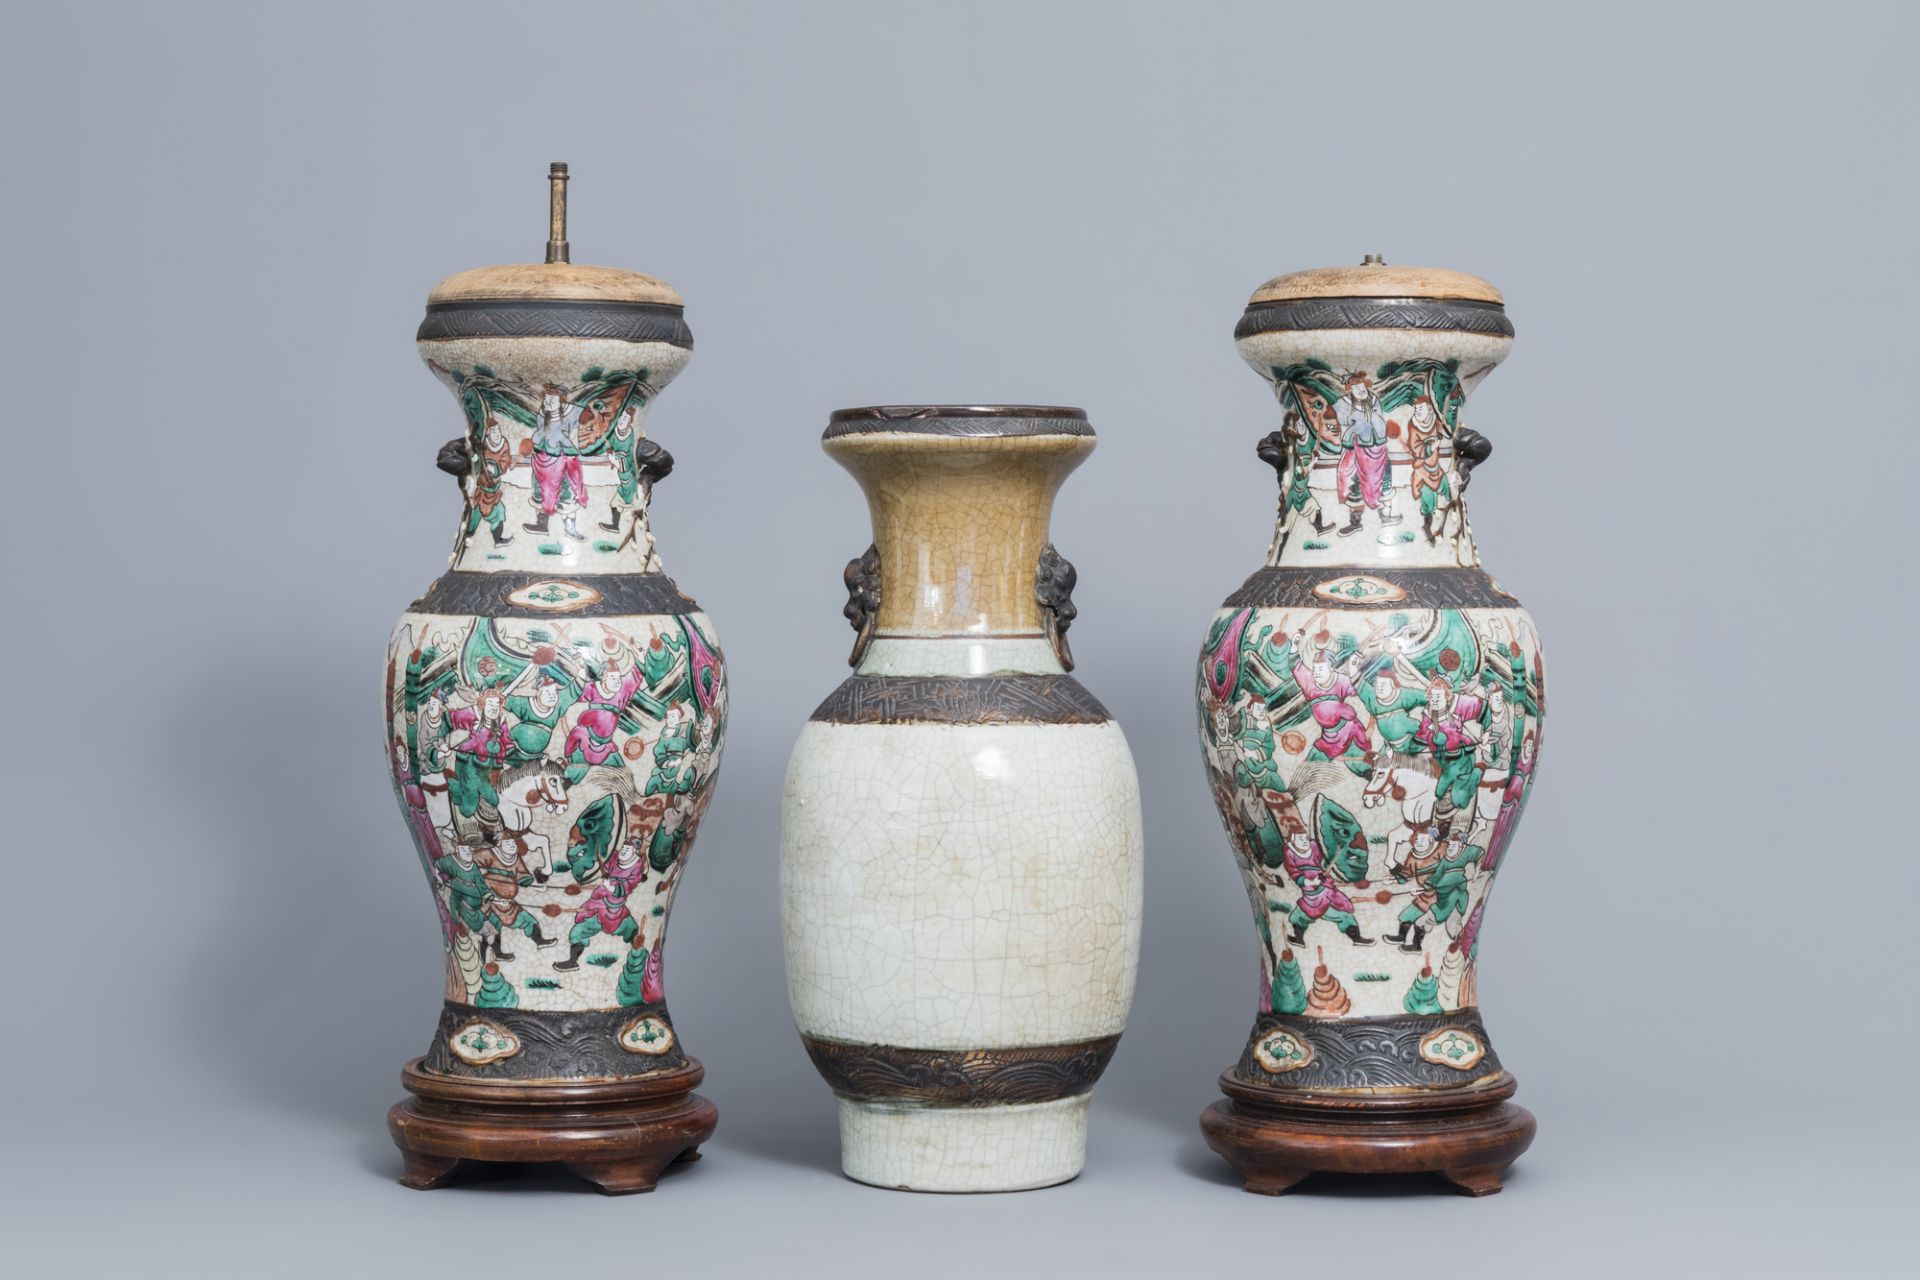 A pair of Chinese Nanking famille rose vases with warrior scenes & a Nanking celadon vase, 19th C. - Image 3 of 6